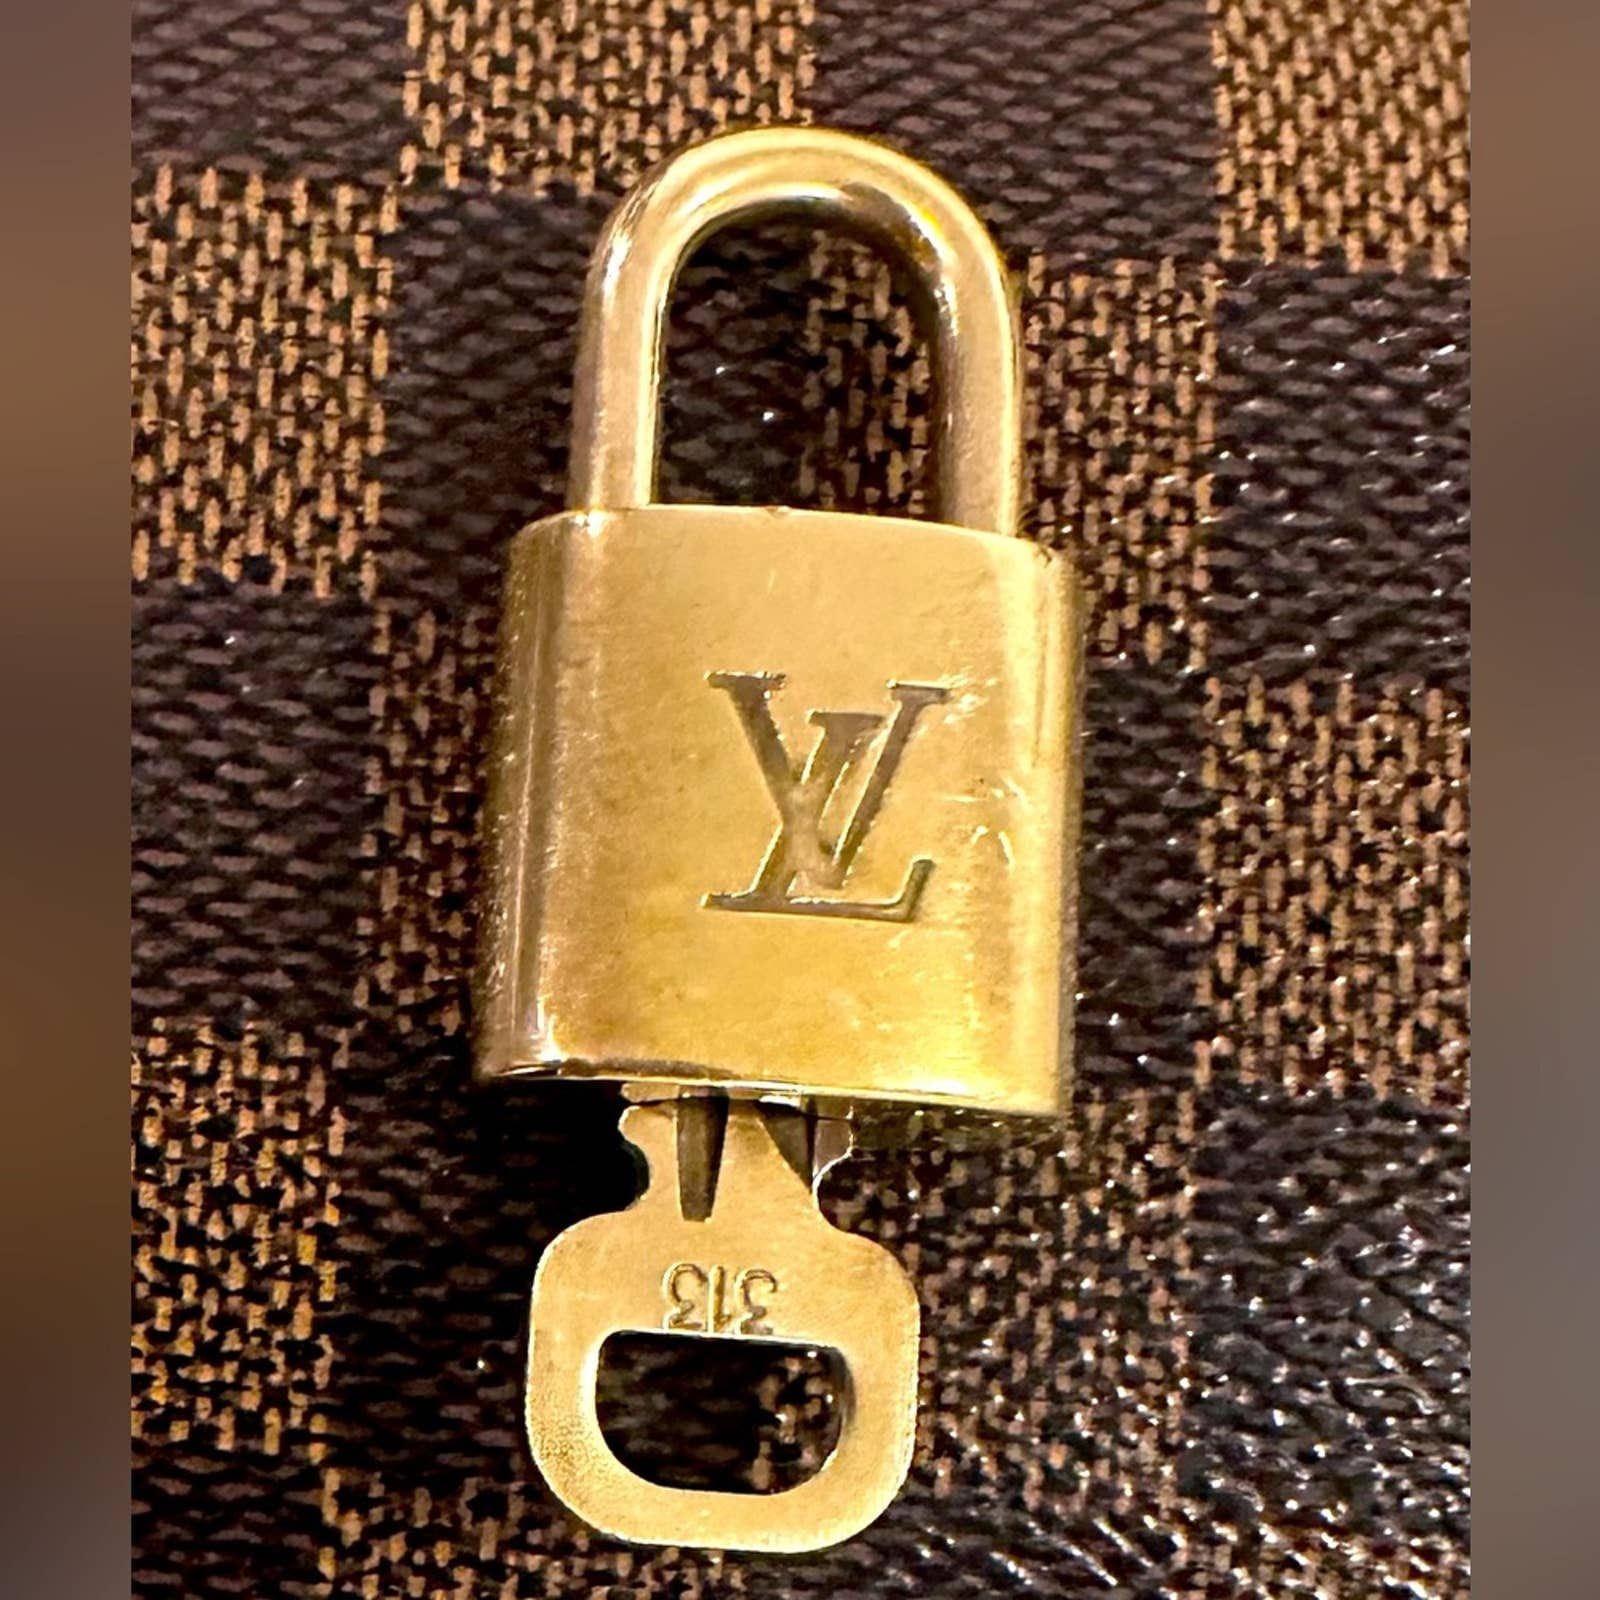 louis vuitton lock and key sets